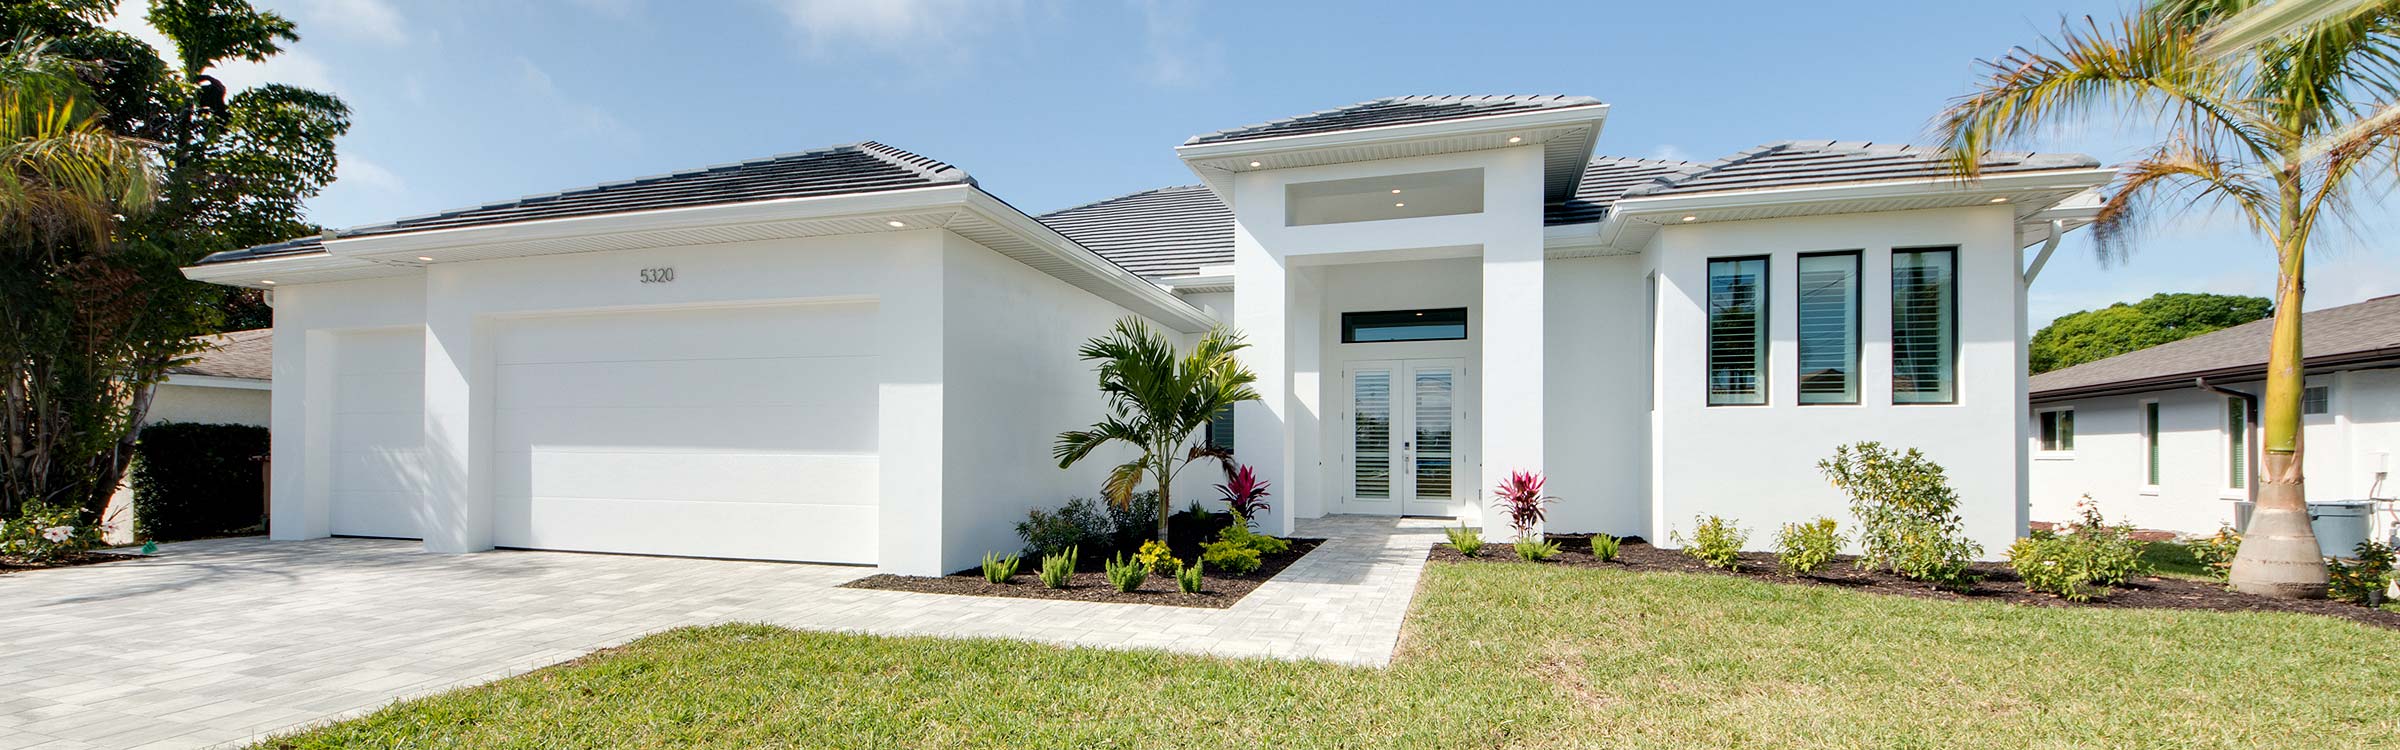 Immobilien in Florida